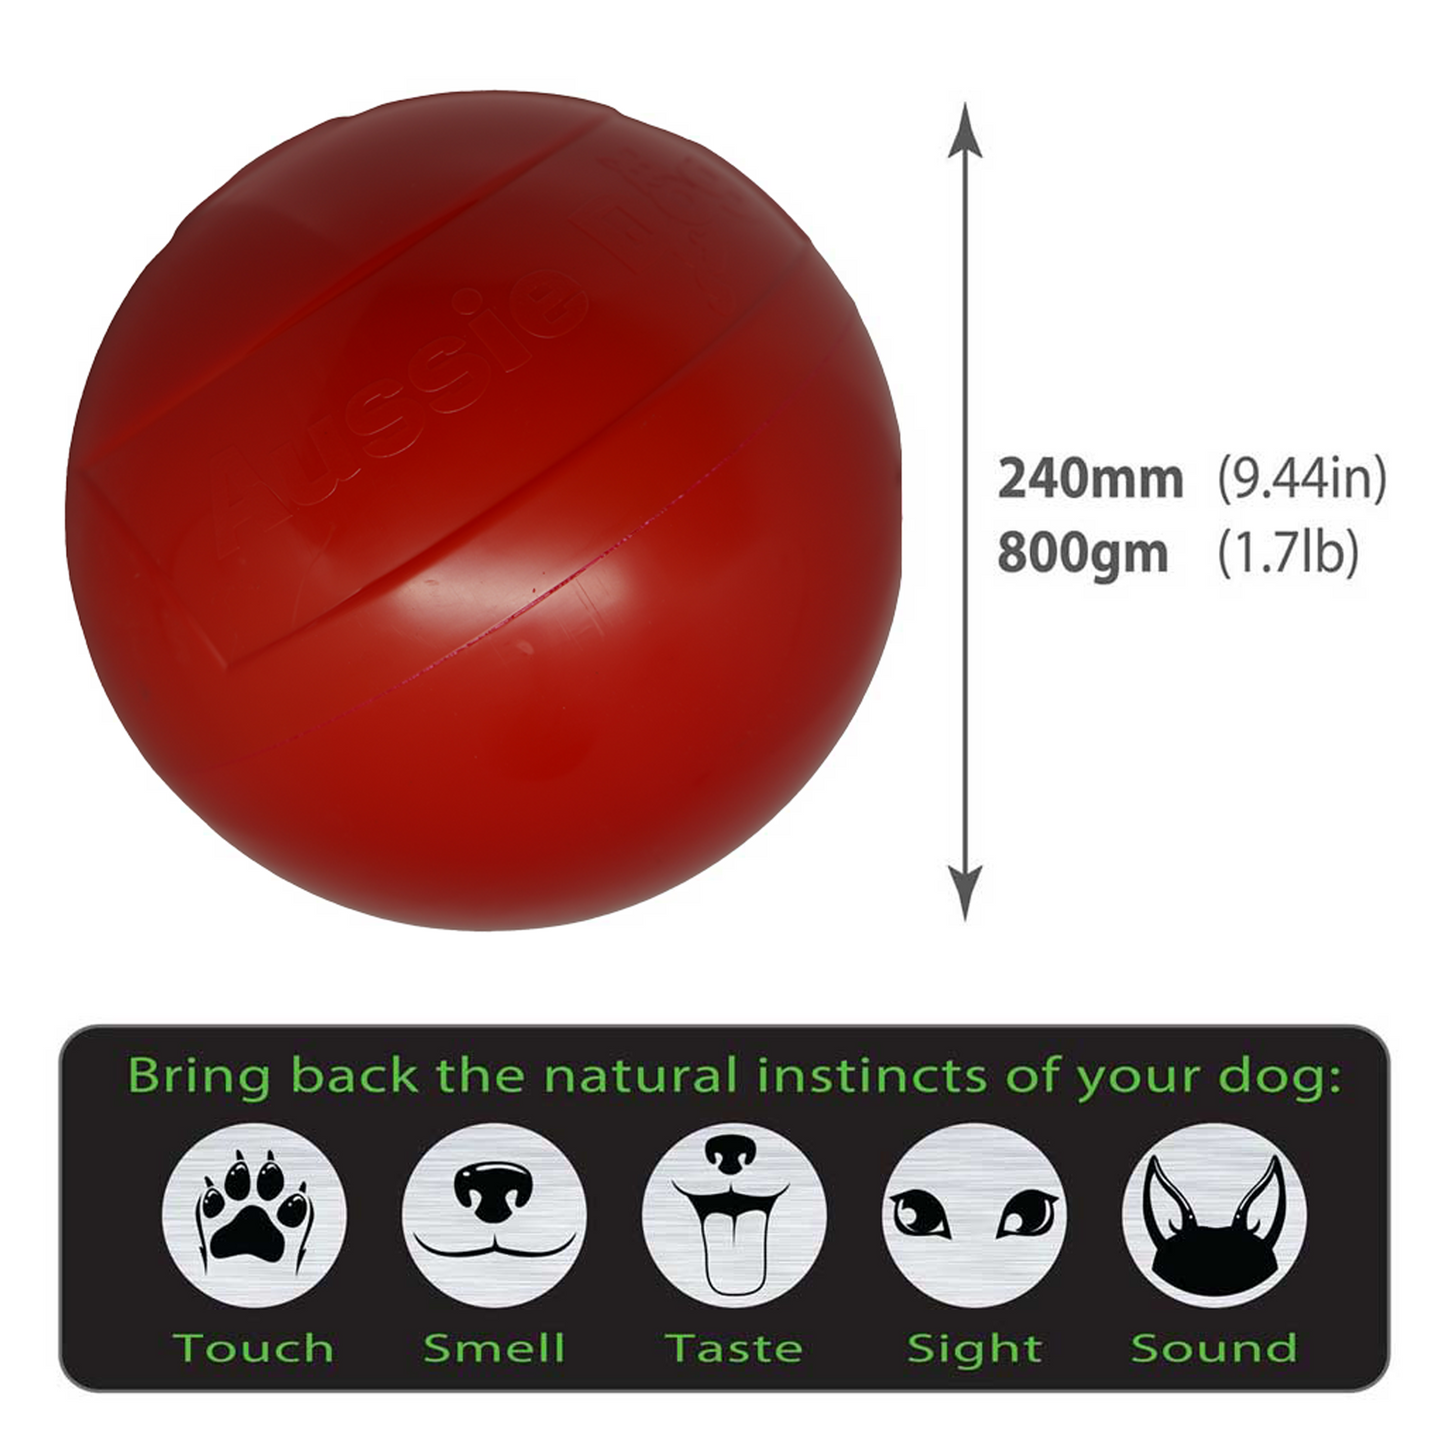 Aussie Dog Enduro Ball - Large for 30 - 50kg dogs